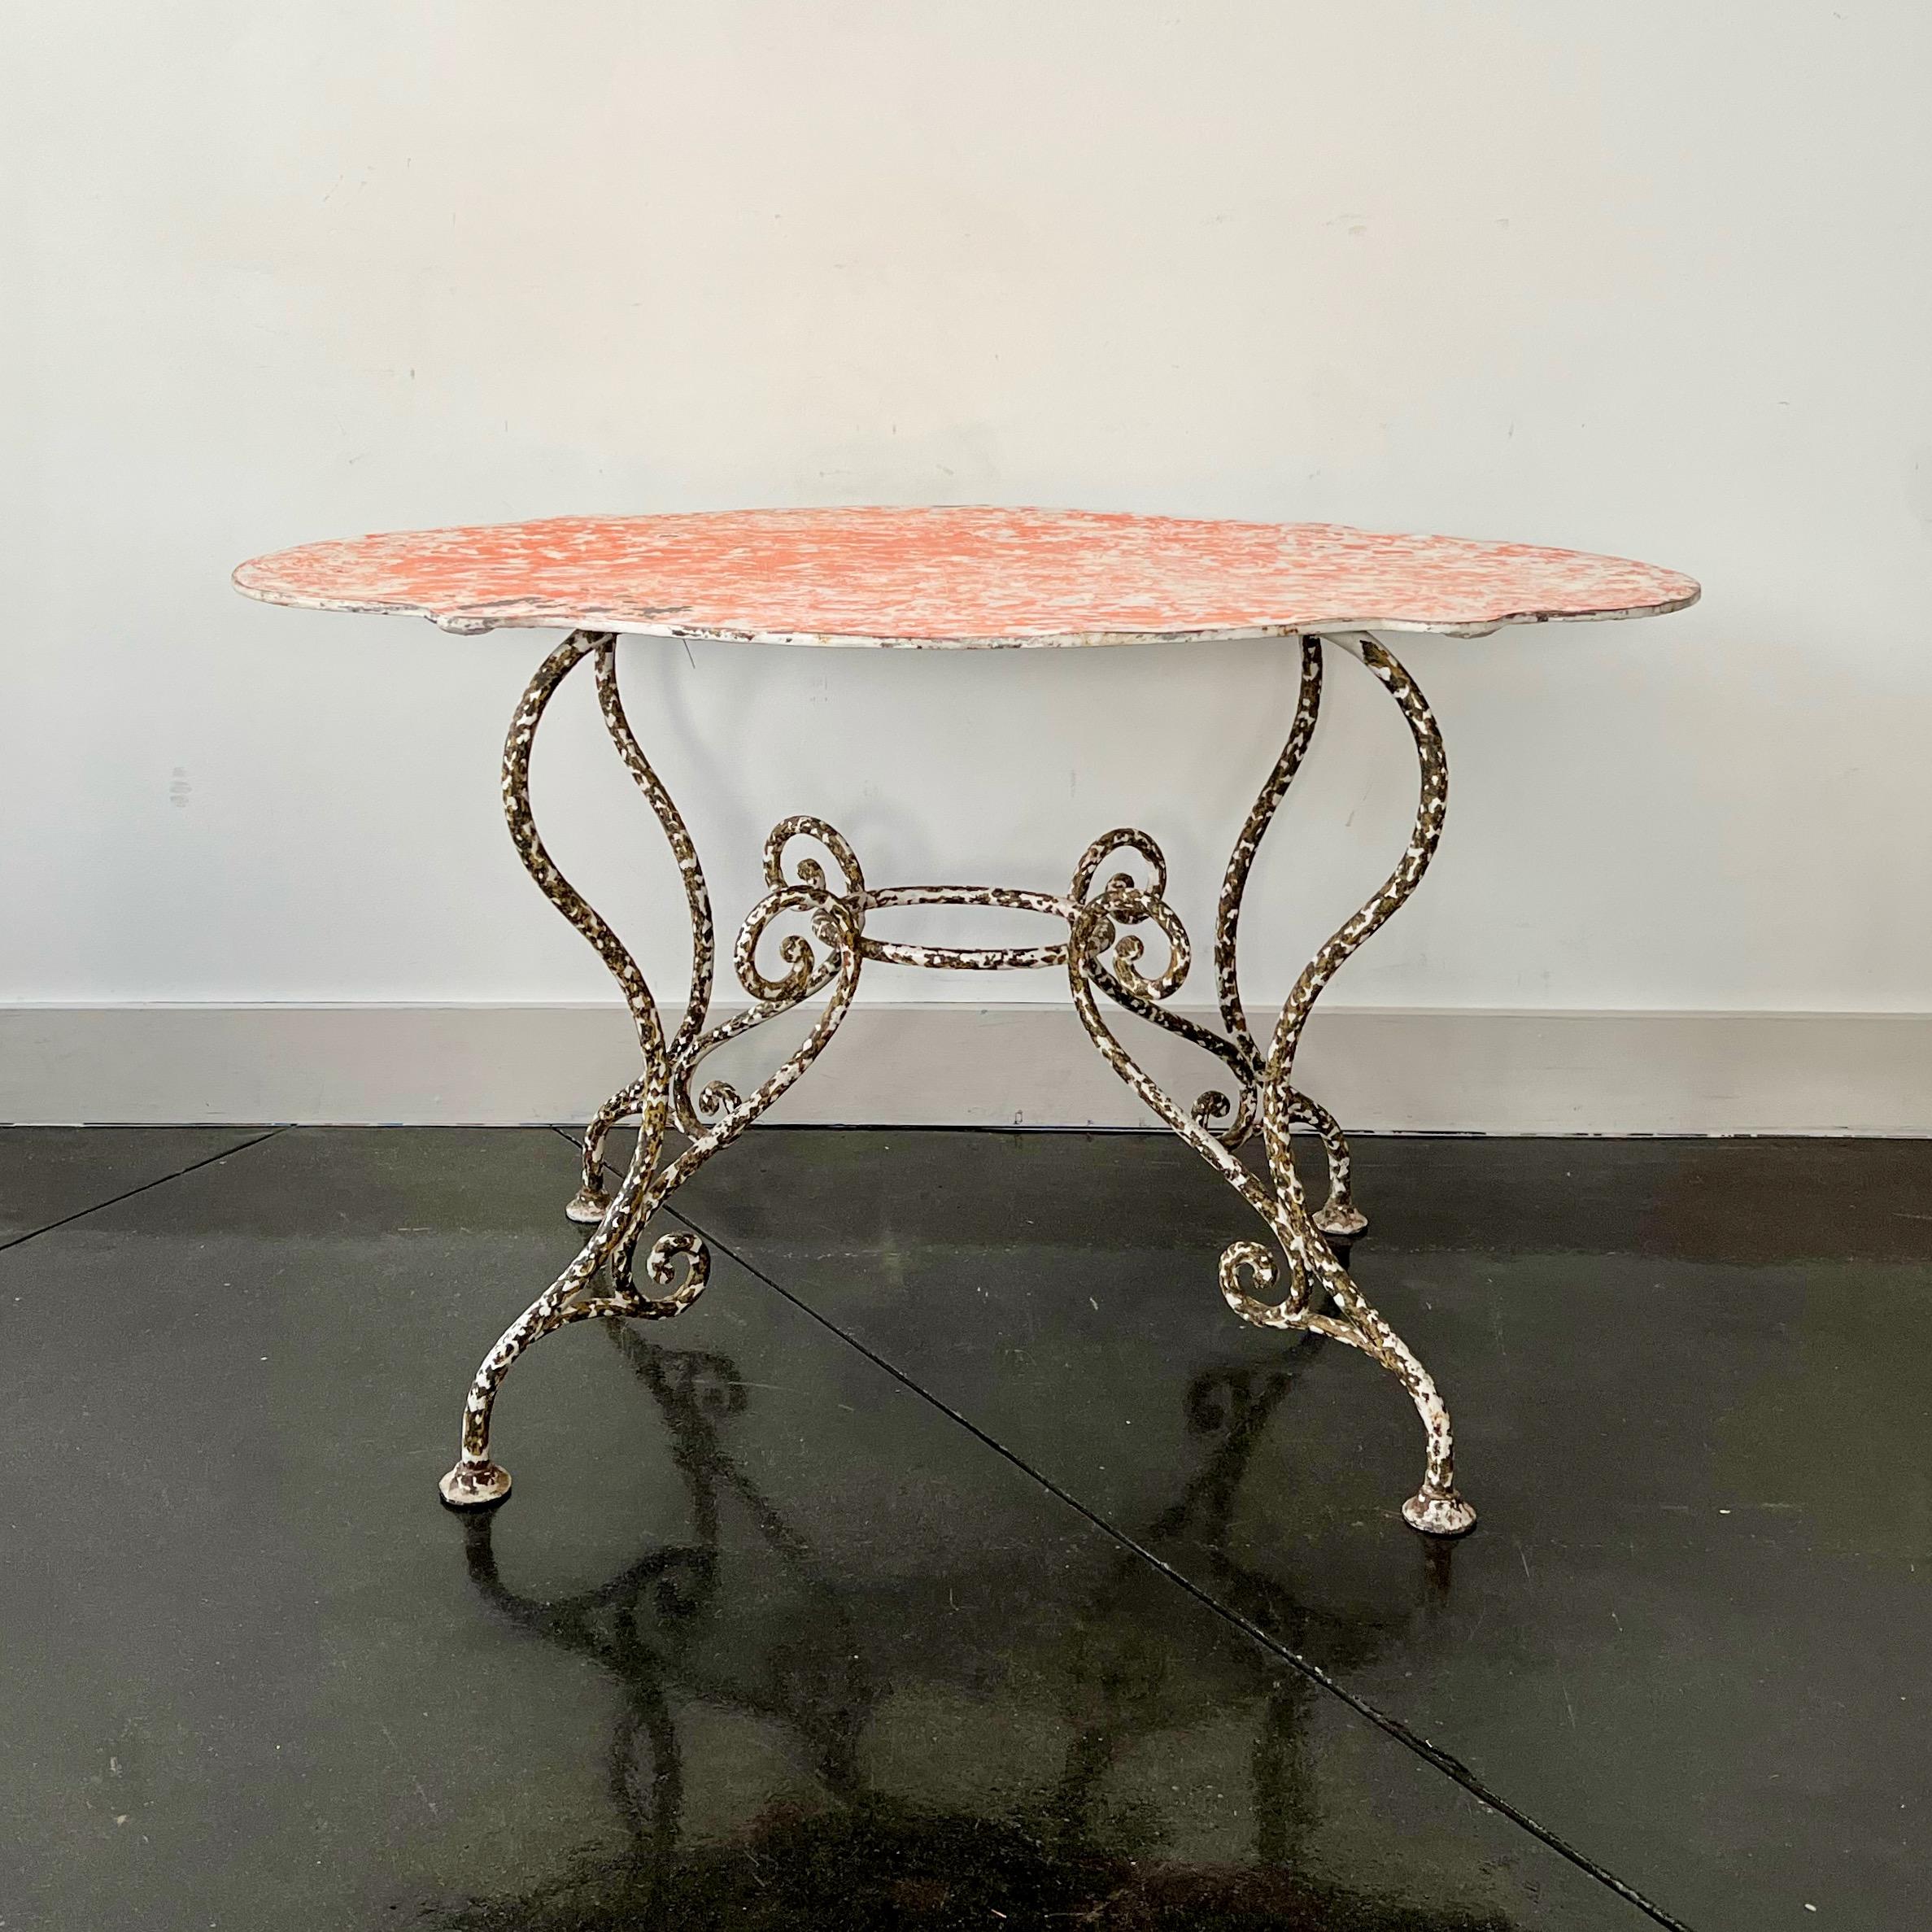 Exceptionally large late 19th century French Arras style oval shaped iron table with beautiful scrolling wrought iron base in chipped paint - structurally in excellent condition.